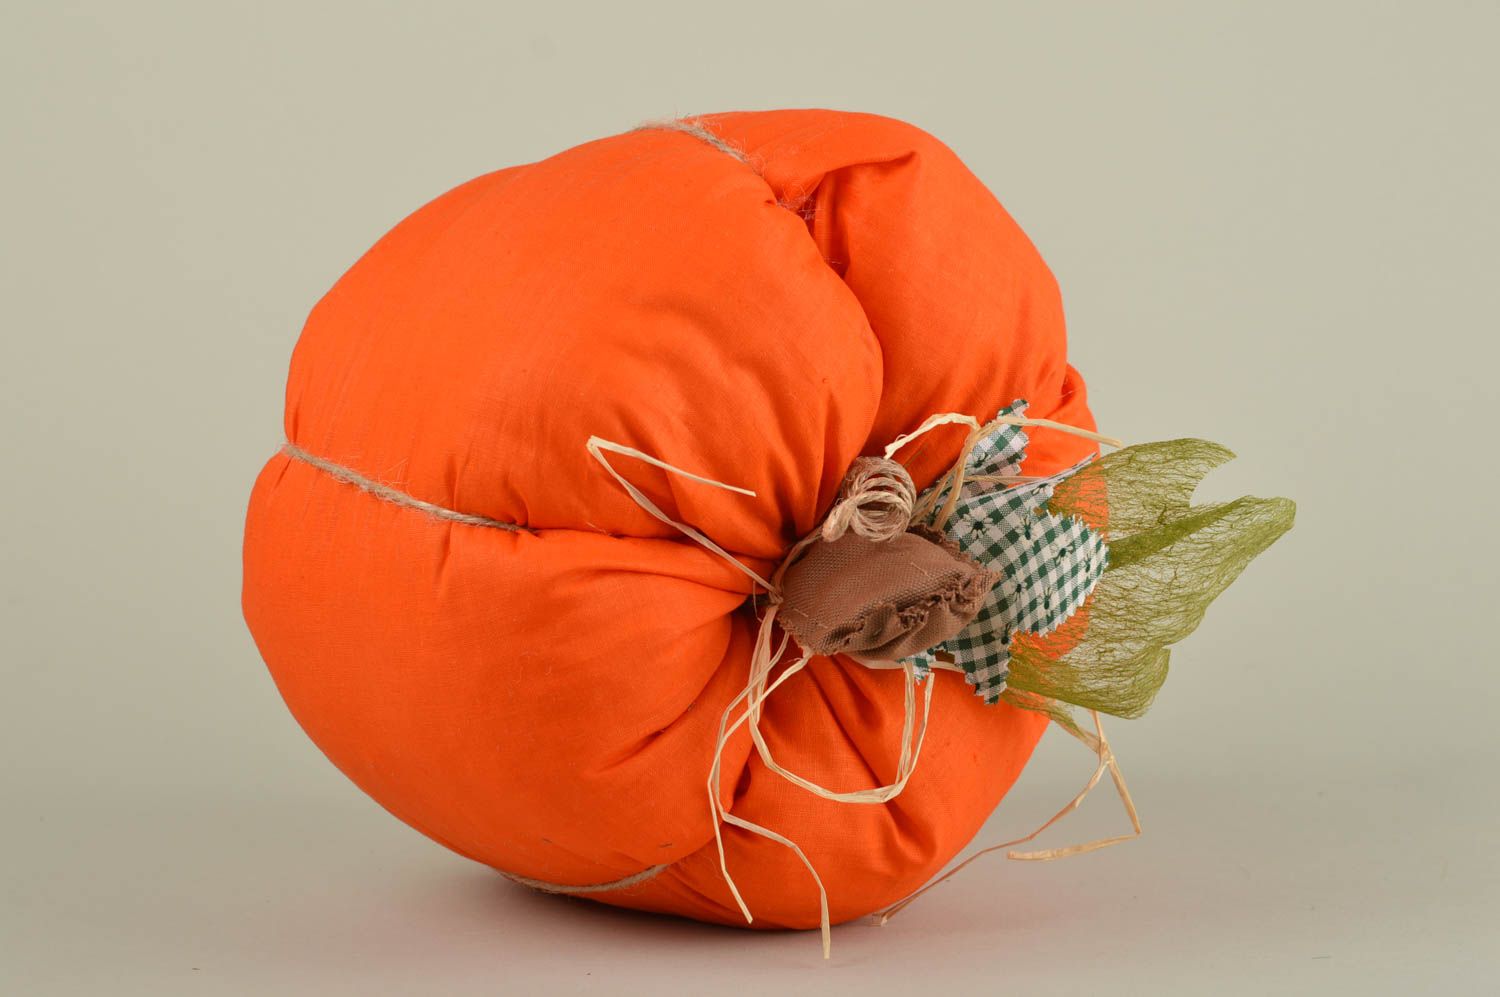 Unusual handmade throw pillow best toys for kids interior decorating ideas photo 5